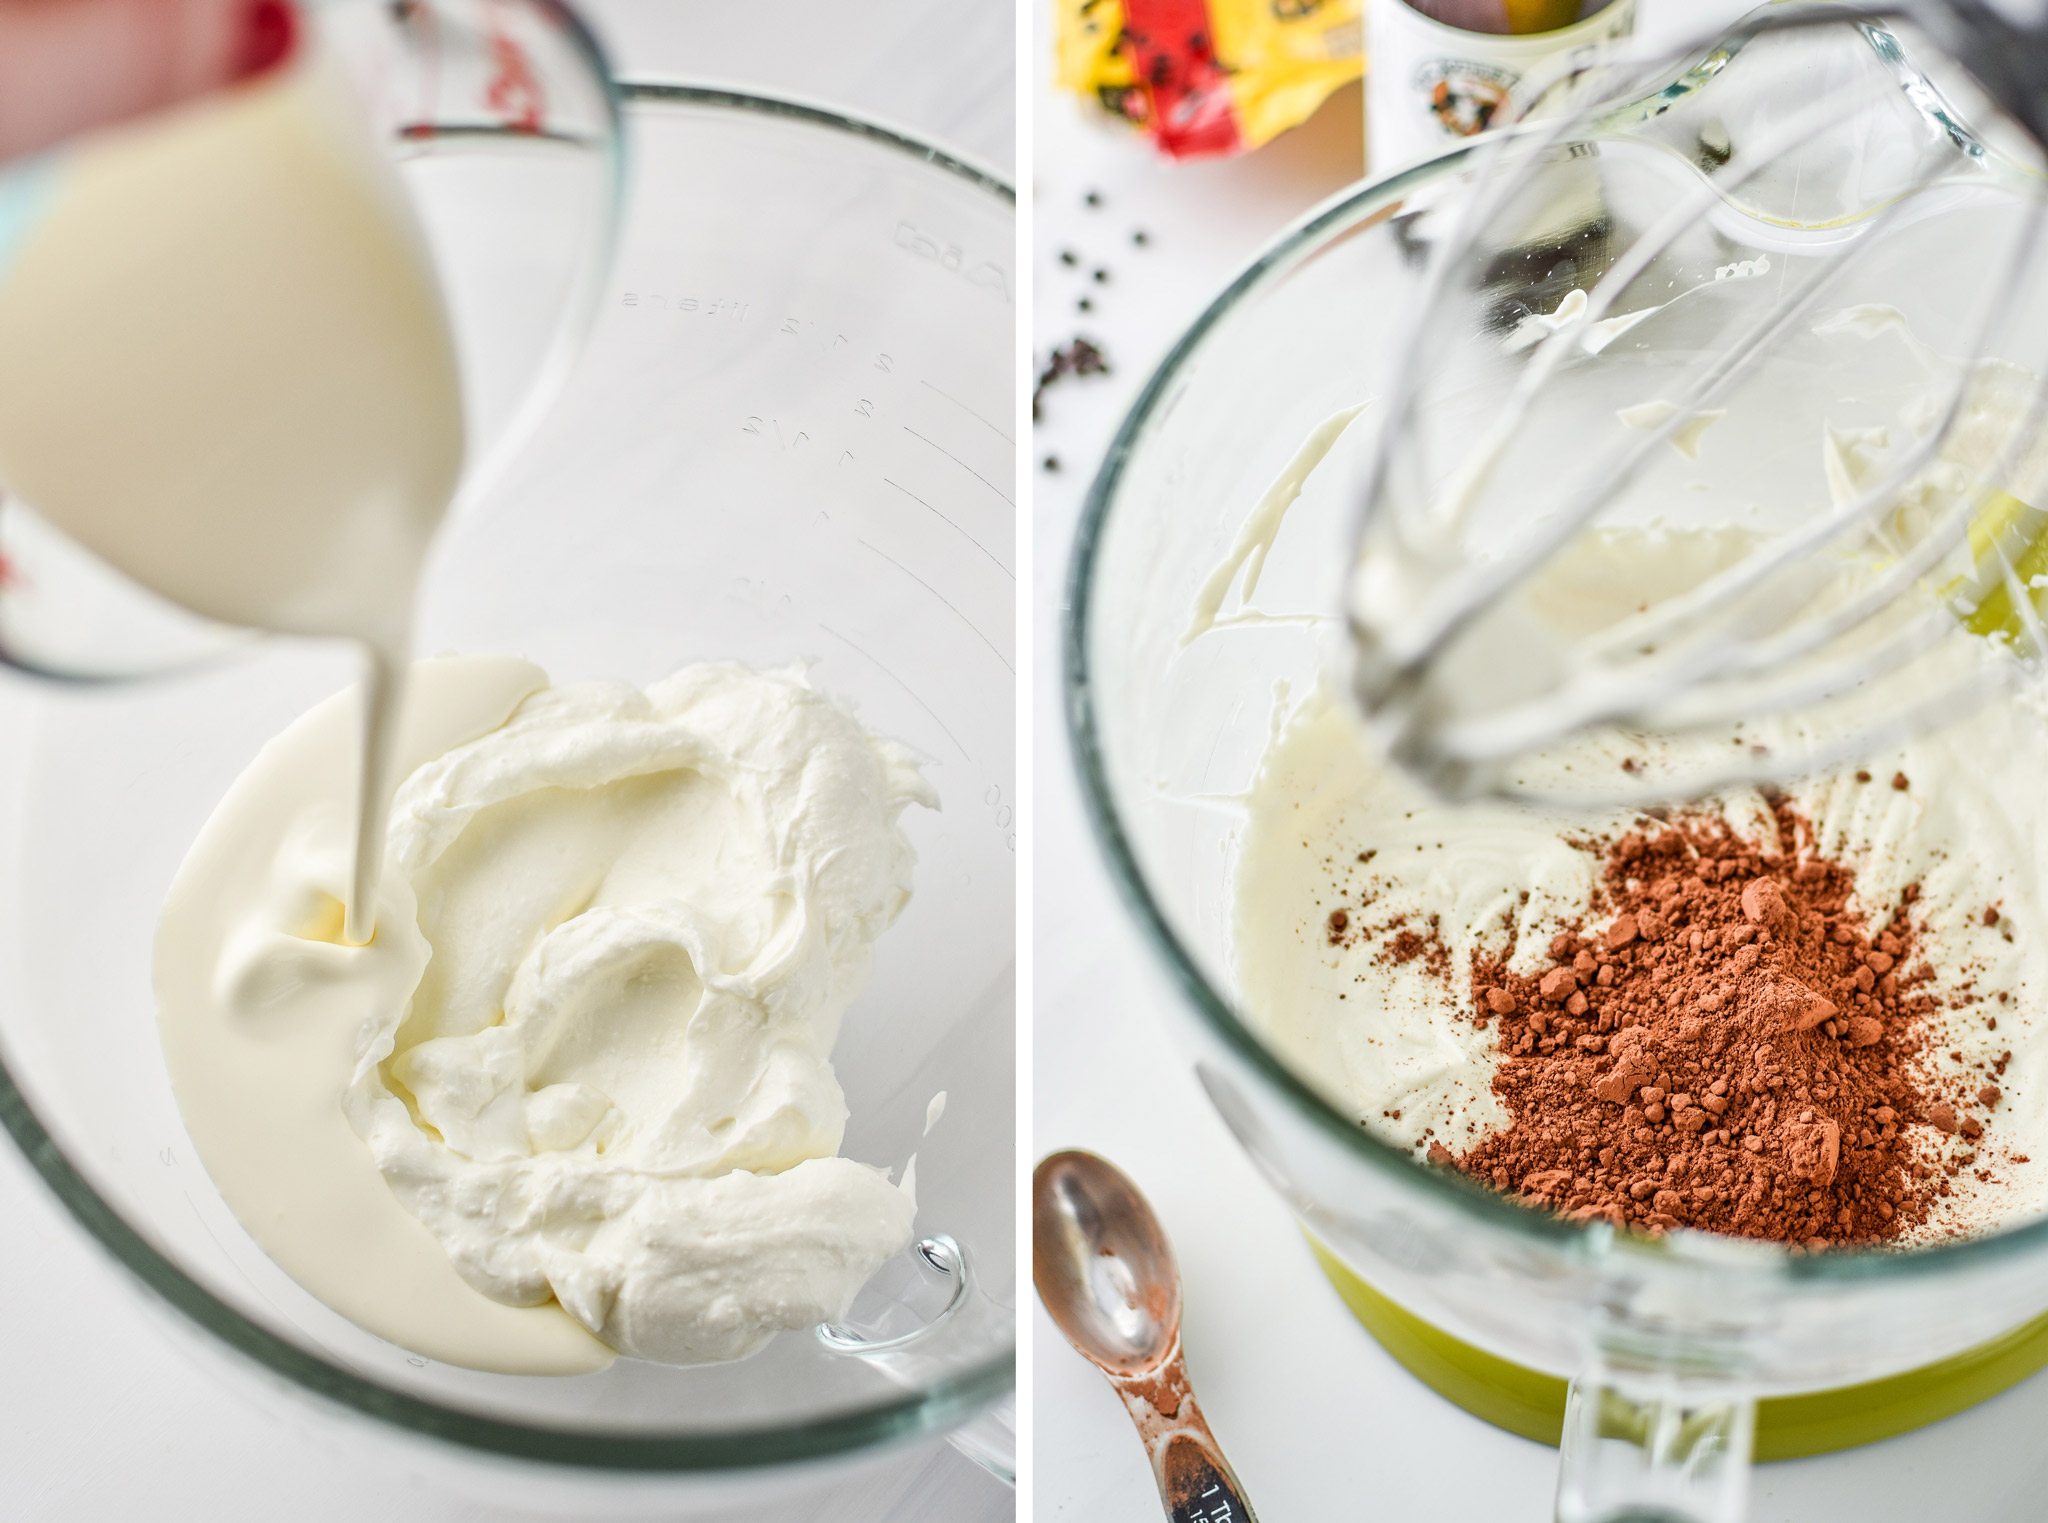 Left: Adding cream. Right: Adding cocoa powder to the peppermint chocolate whipped greek yogurt